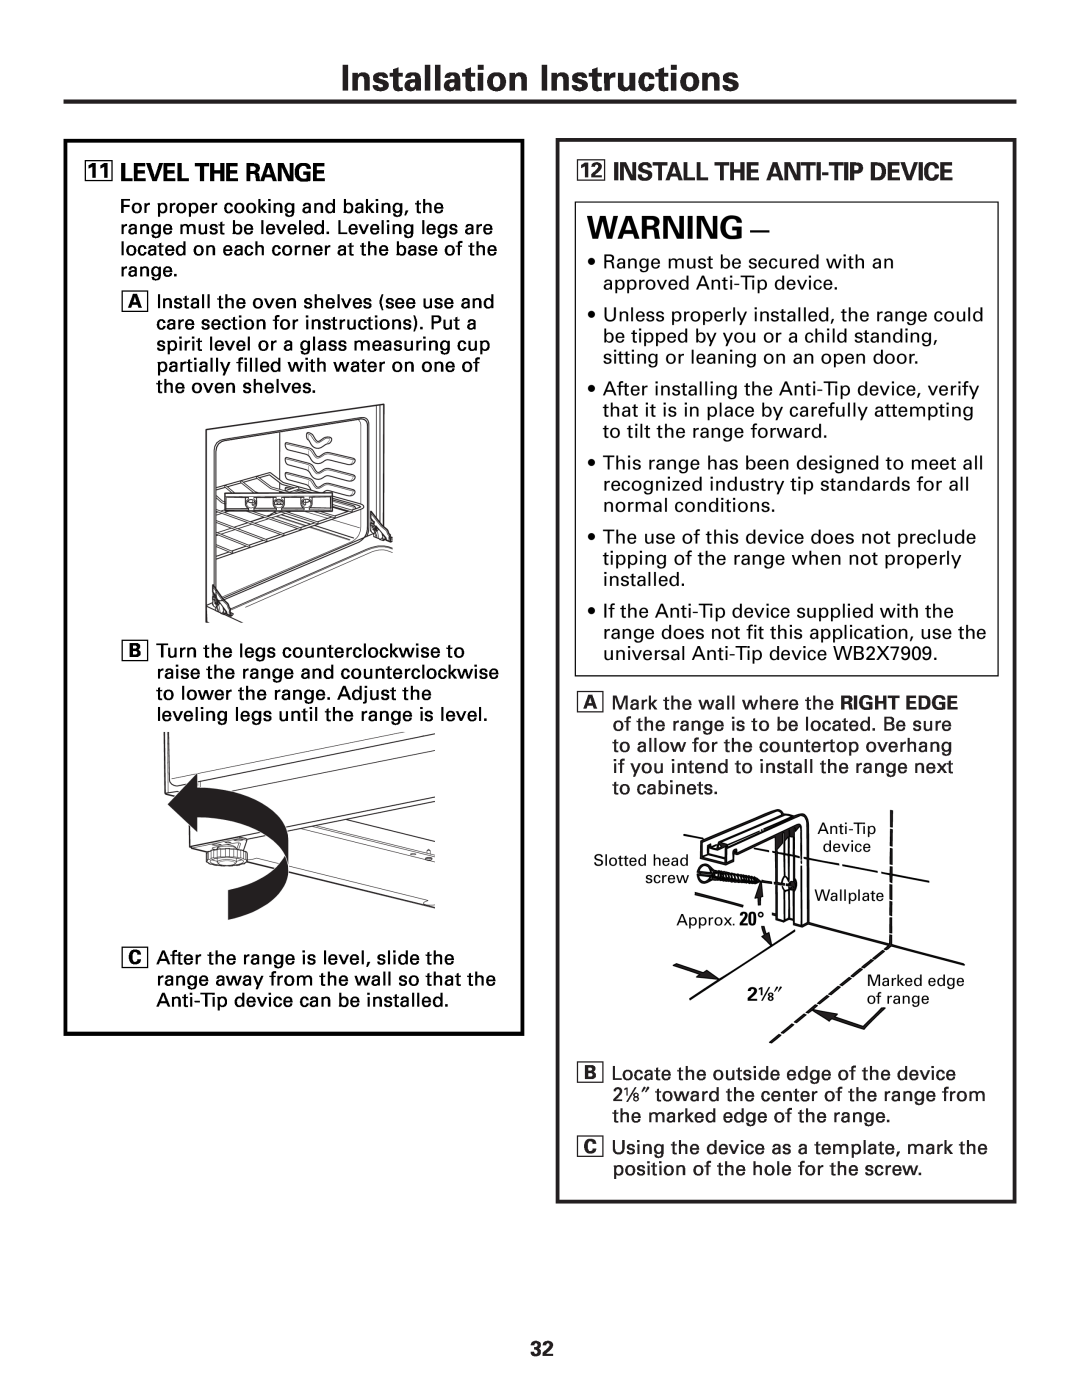 GE JGAS02 owner manual 11LEVEL THE RANGE, 12INSTALL THE ANTI-TIPDEVICE, Installation Instructions 